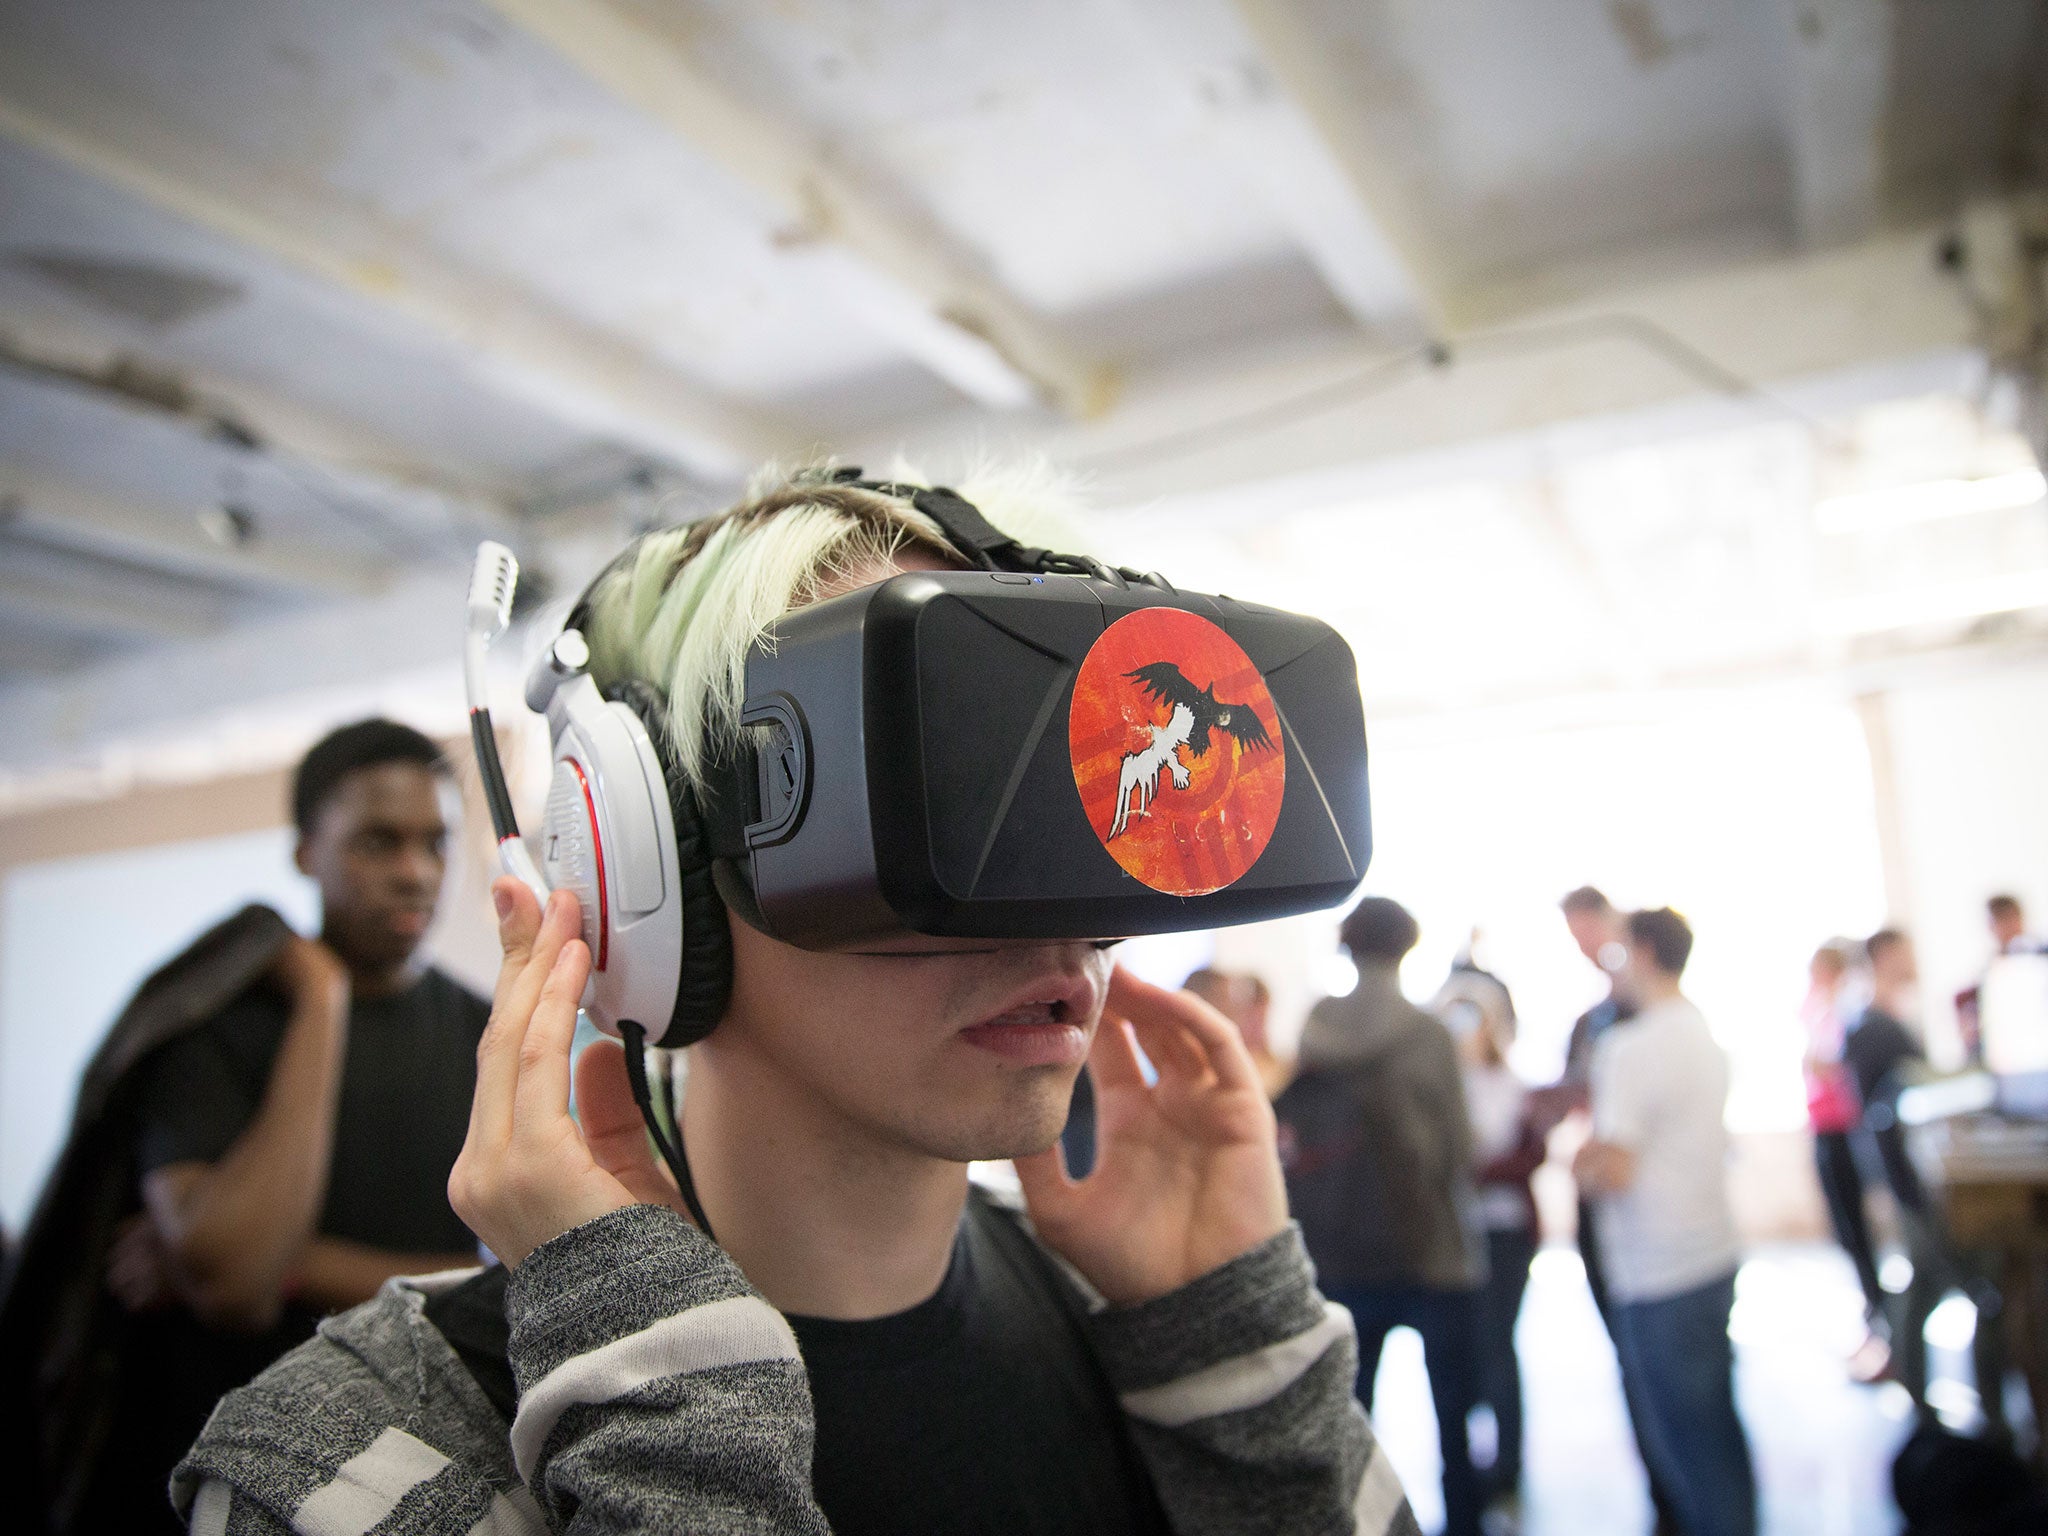 The trailblazing virtual reality headset will finally go on sale in 2016 = after its rivals